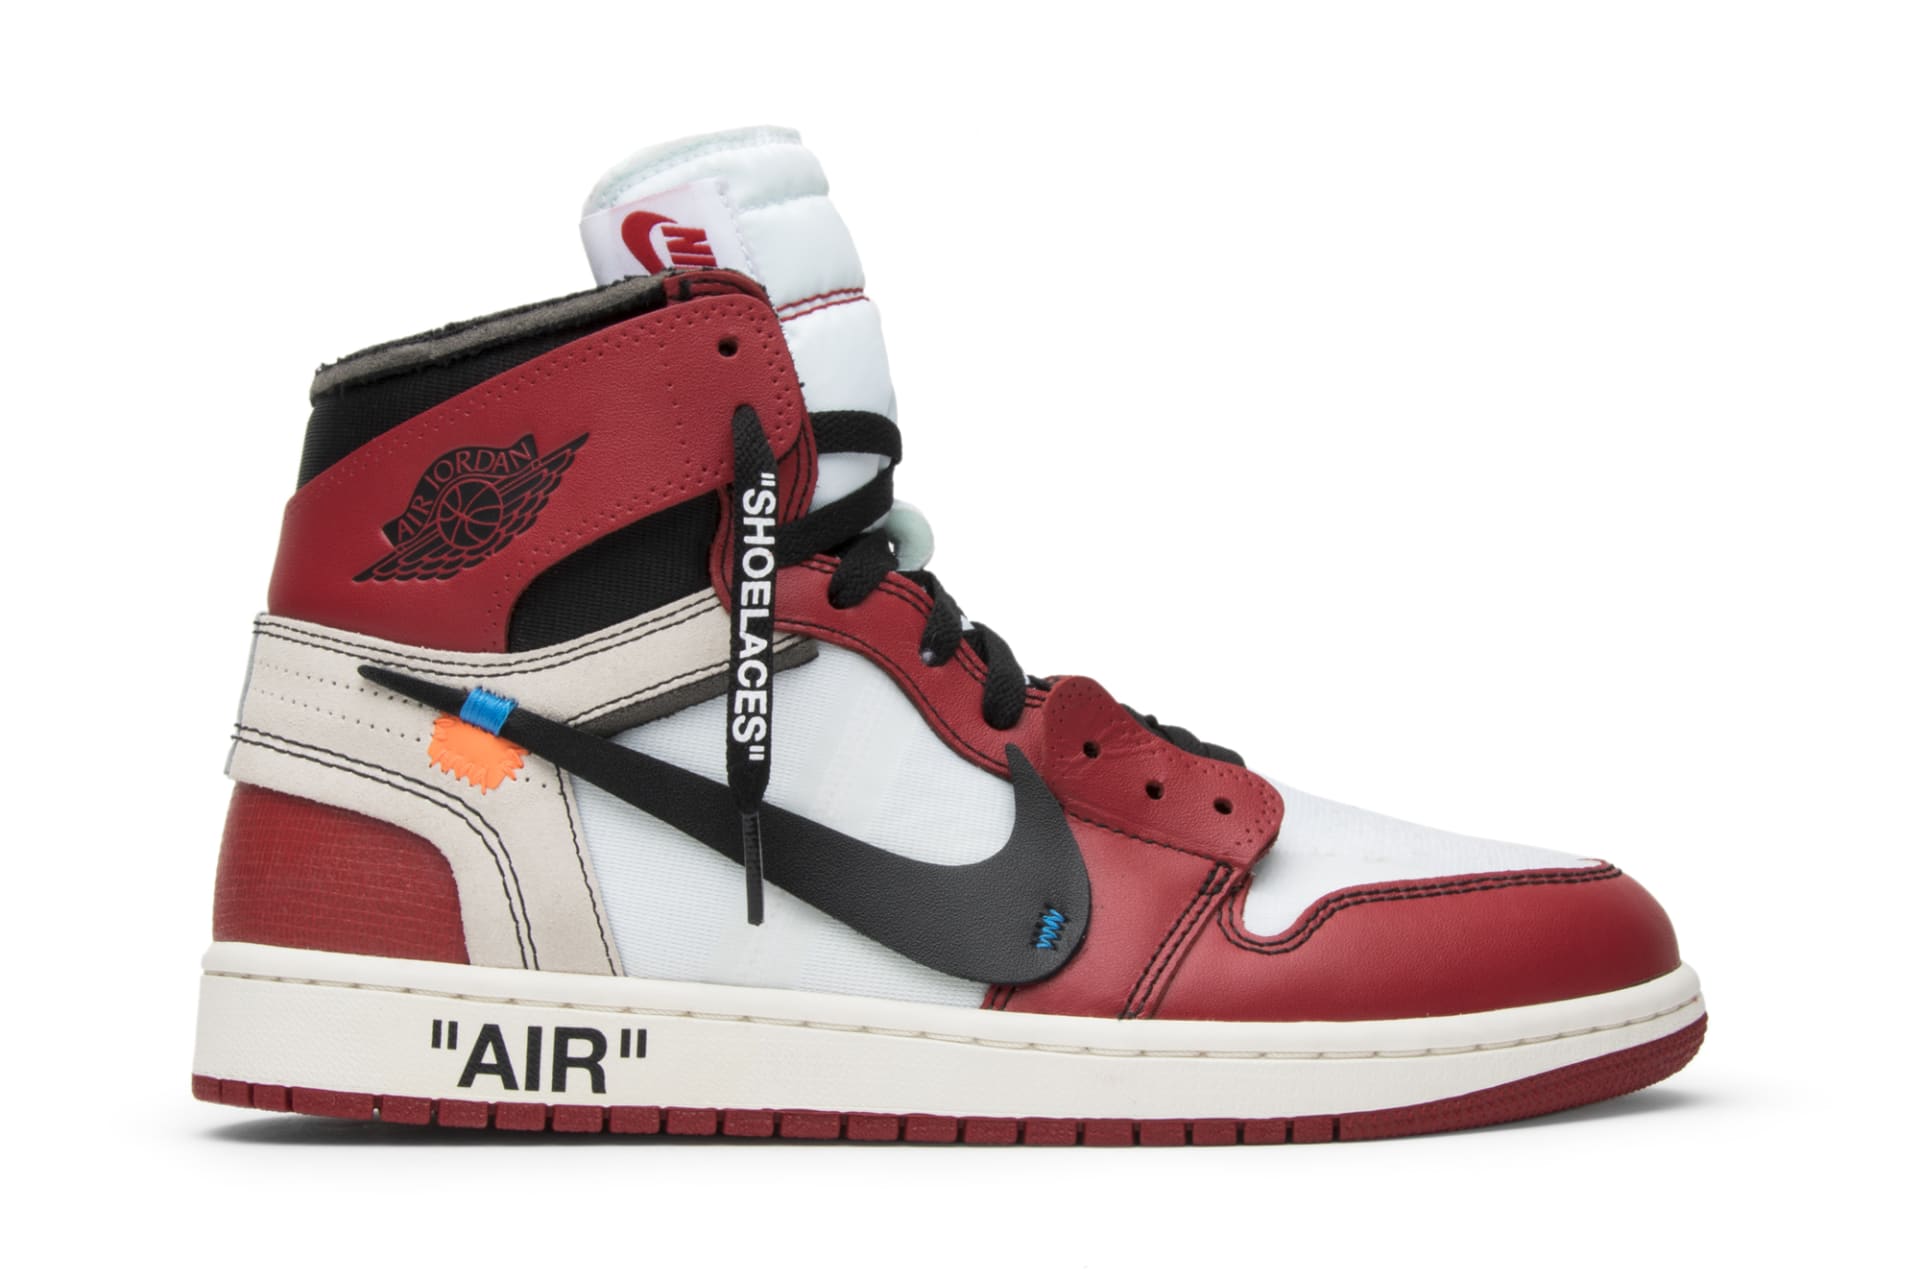 The Off-White x Jordan Collaborations on GOAT | Complex